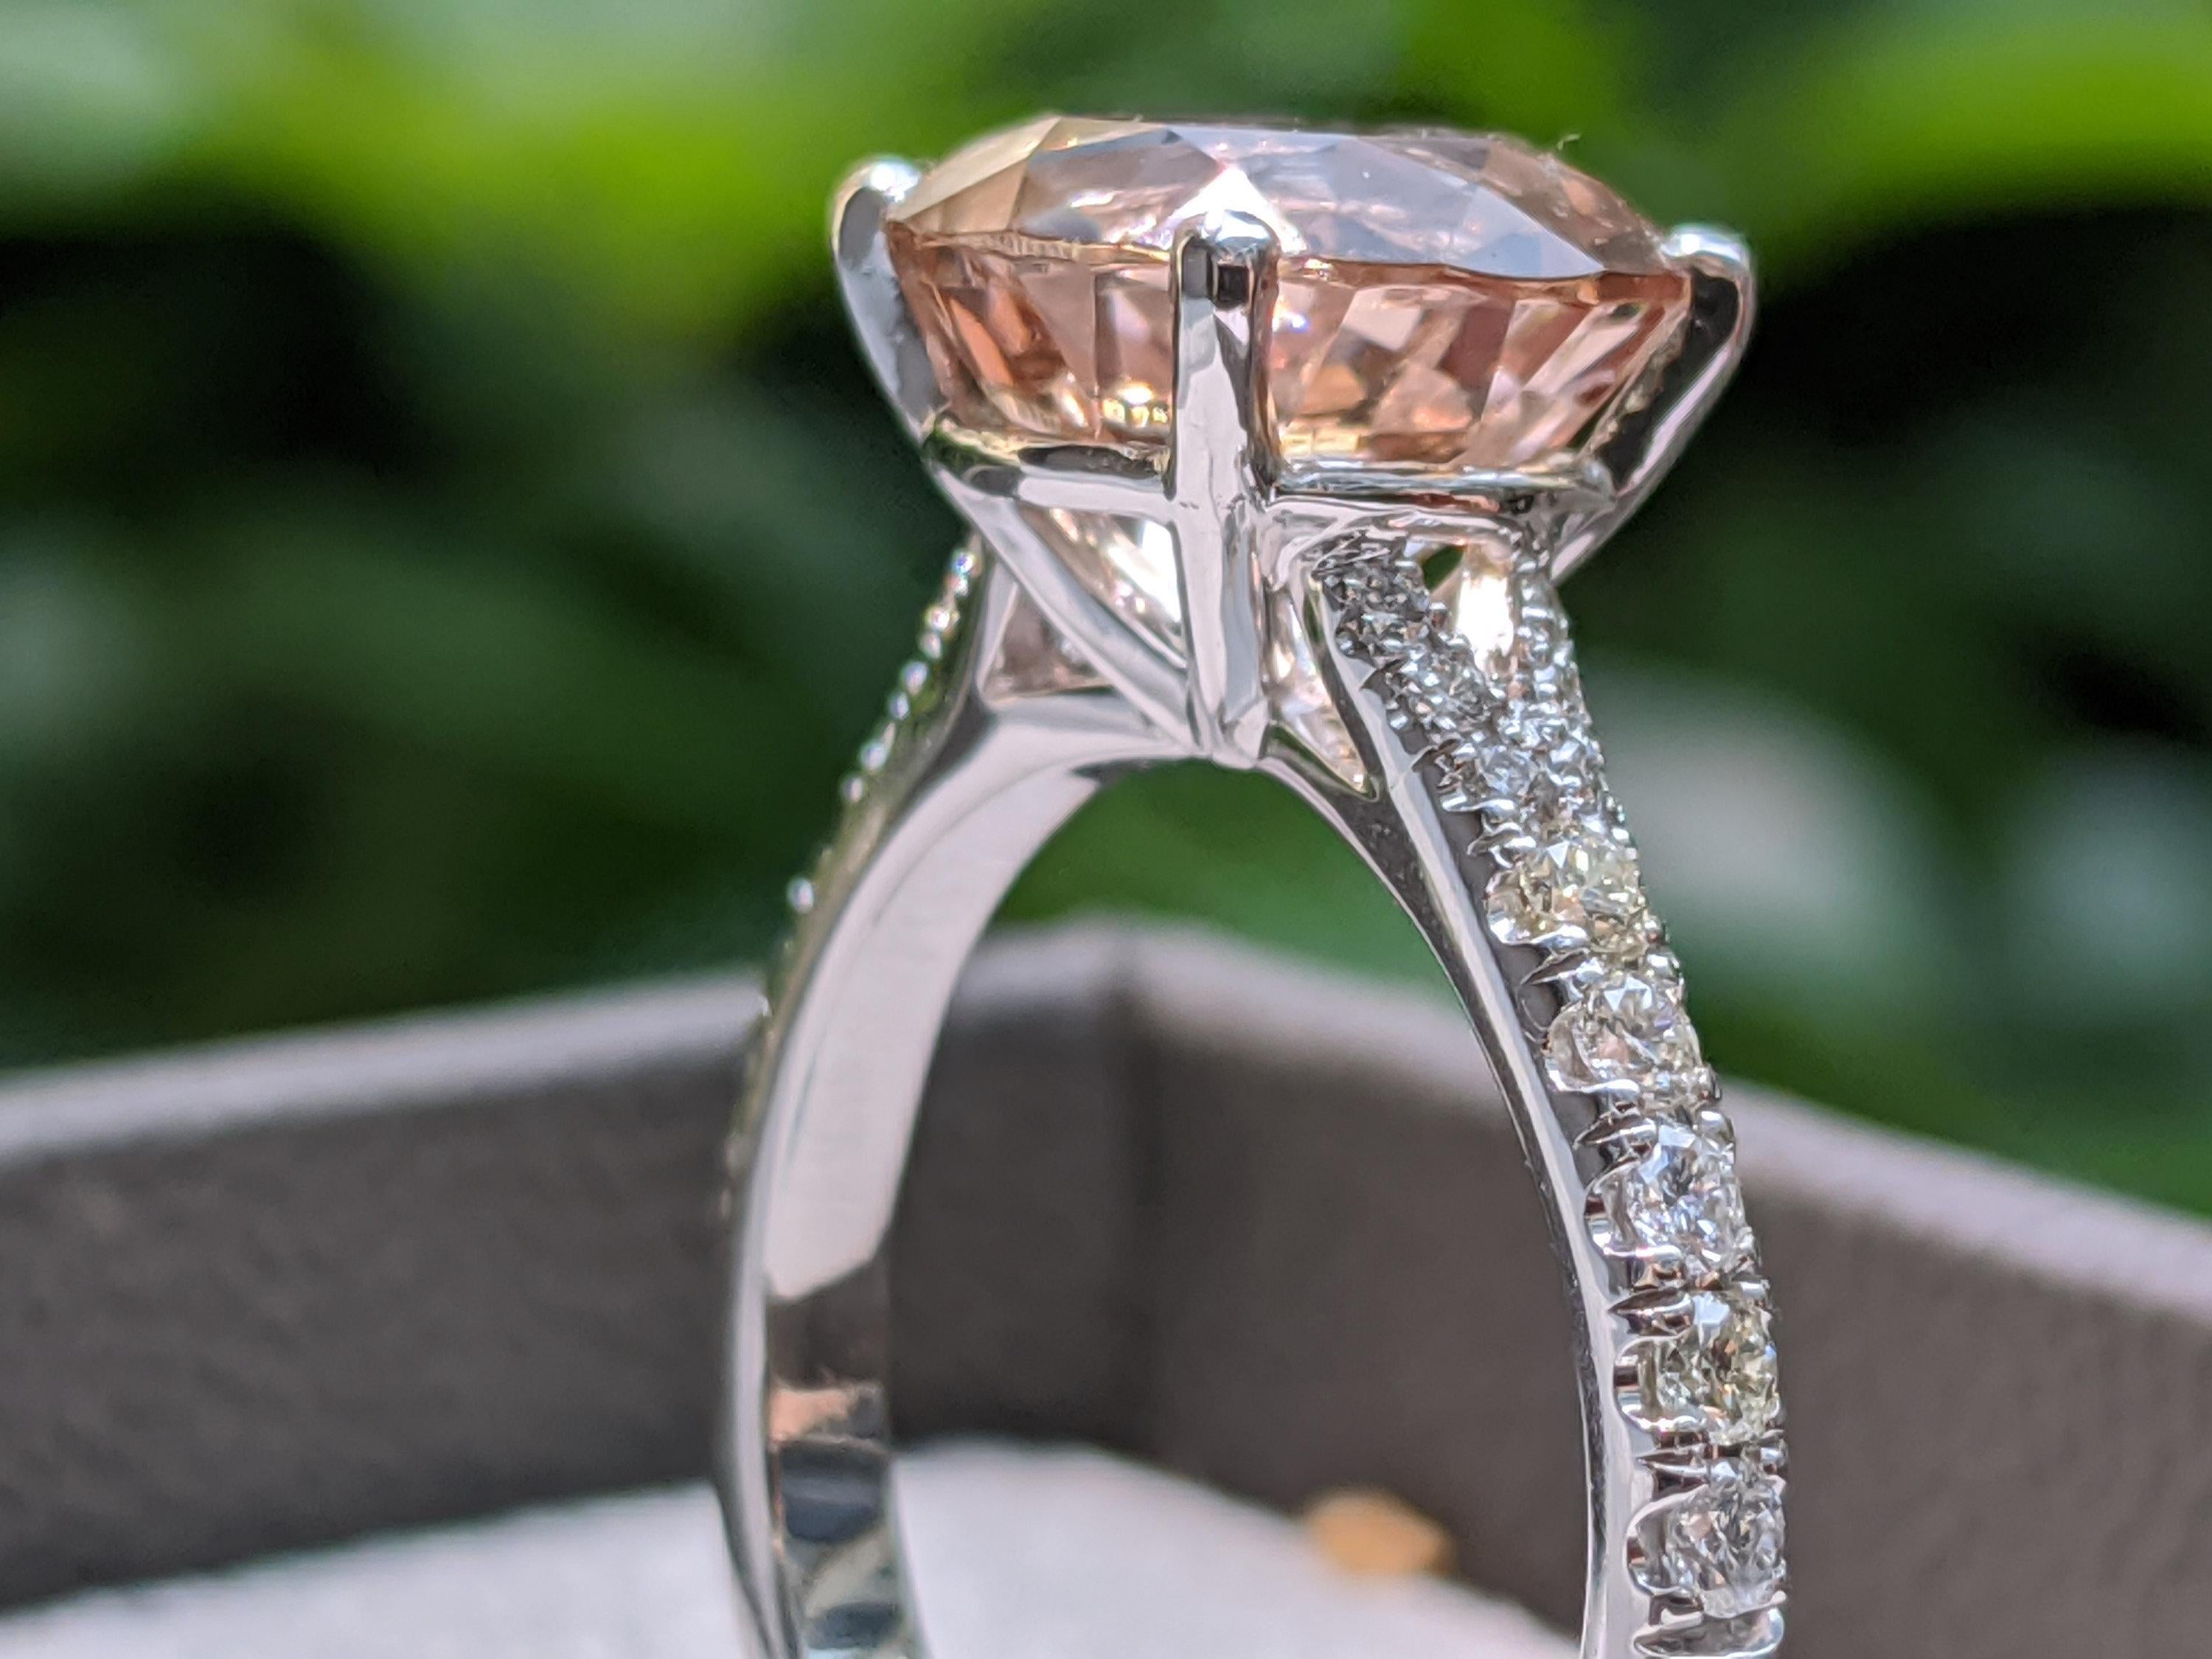 One of a kind 3 Carat Morganite and Diamonds Engagement Ring - An amazing 2.5ct pink/peach natural round morganite gemstone, adorned by 1/2ctw of white natural diamonds - this ring is a great diamond alternative ring that will draw attention